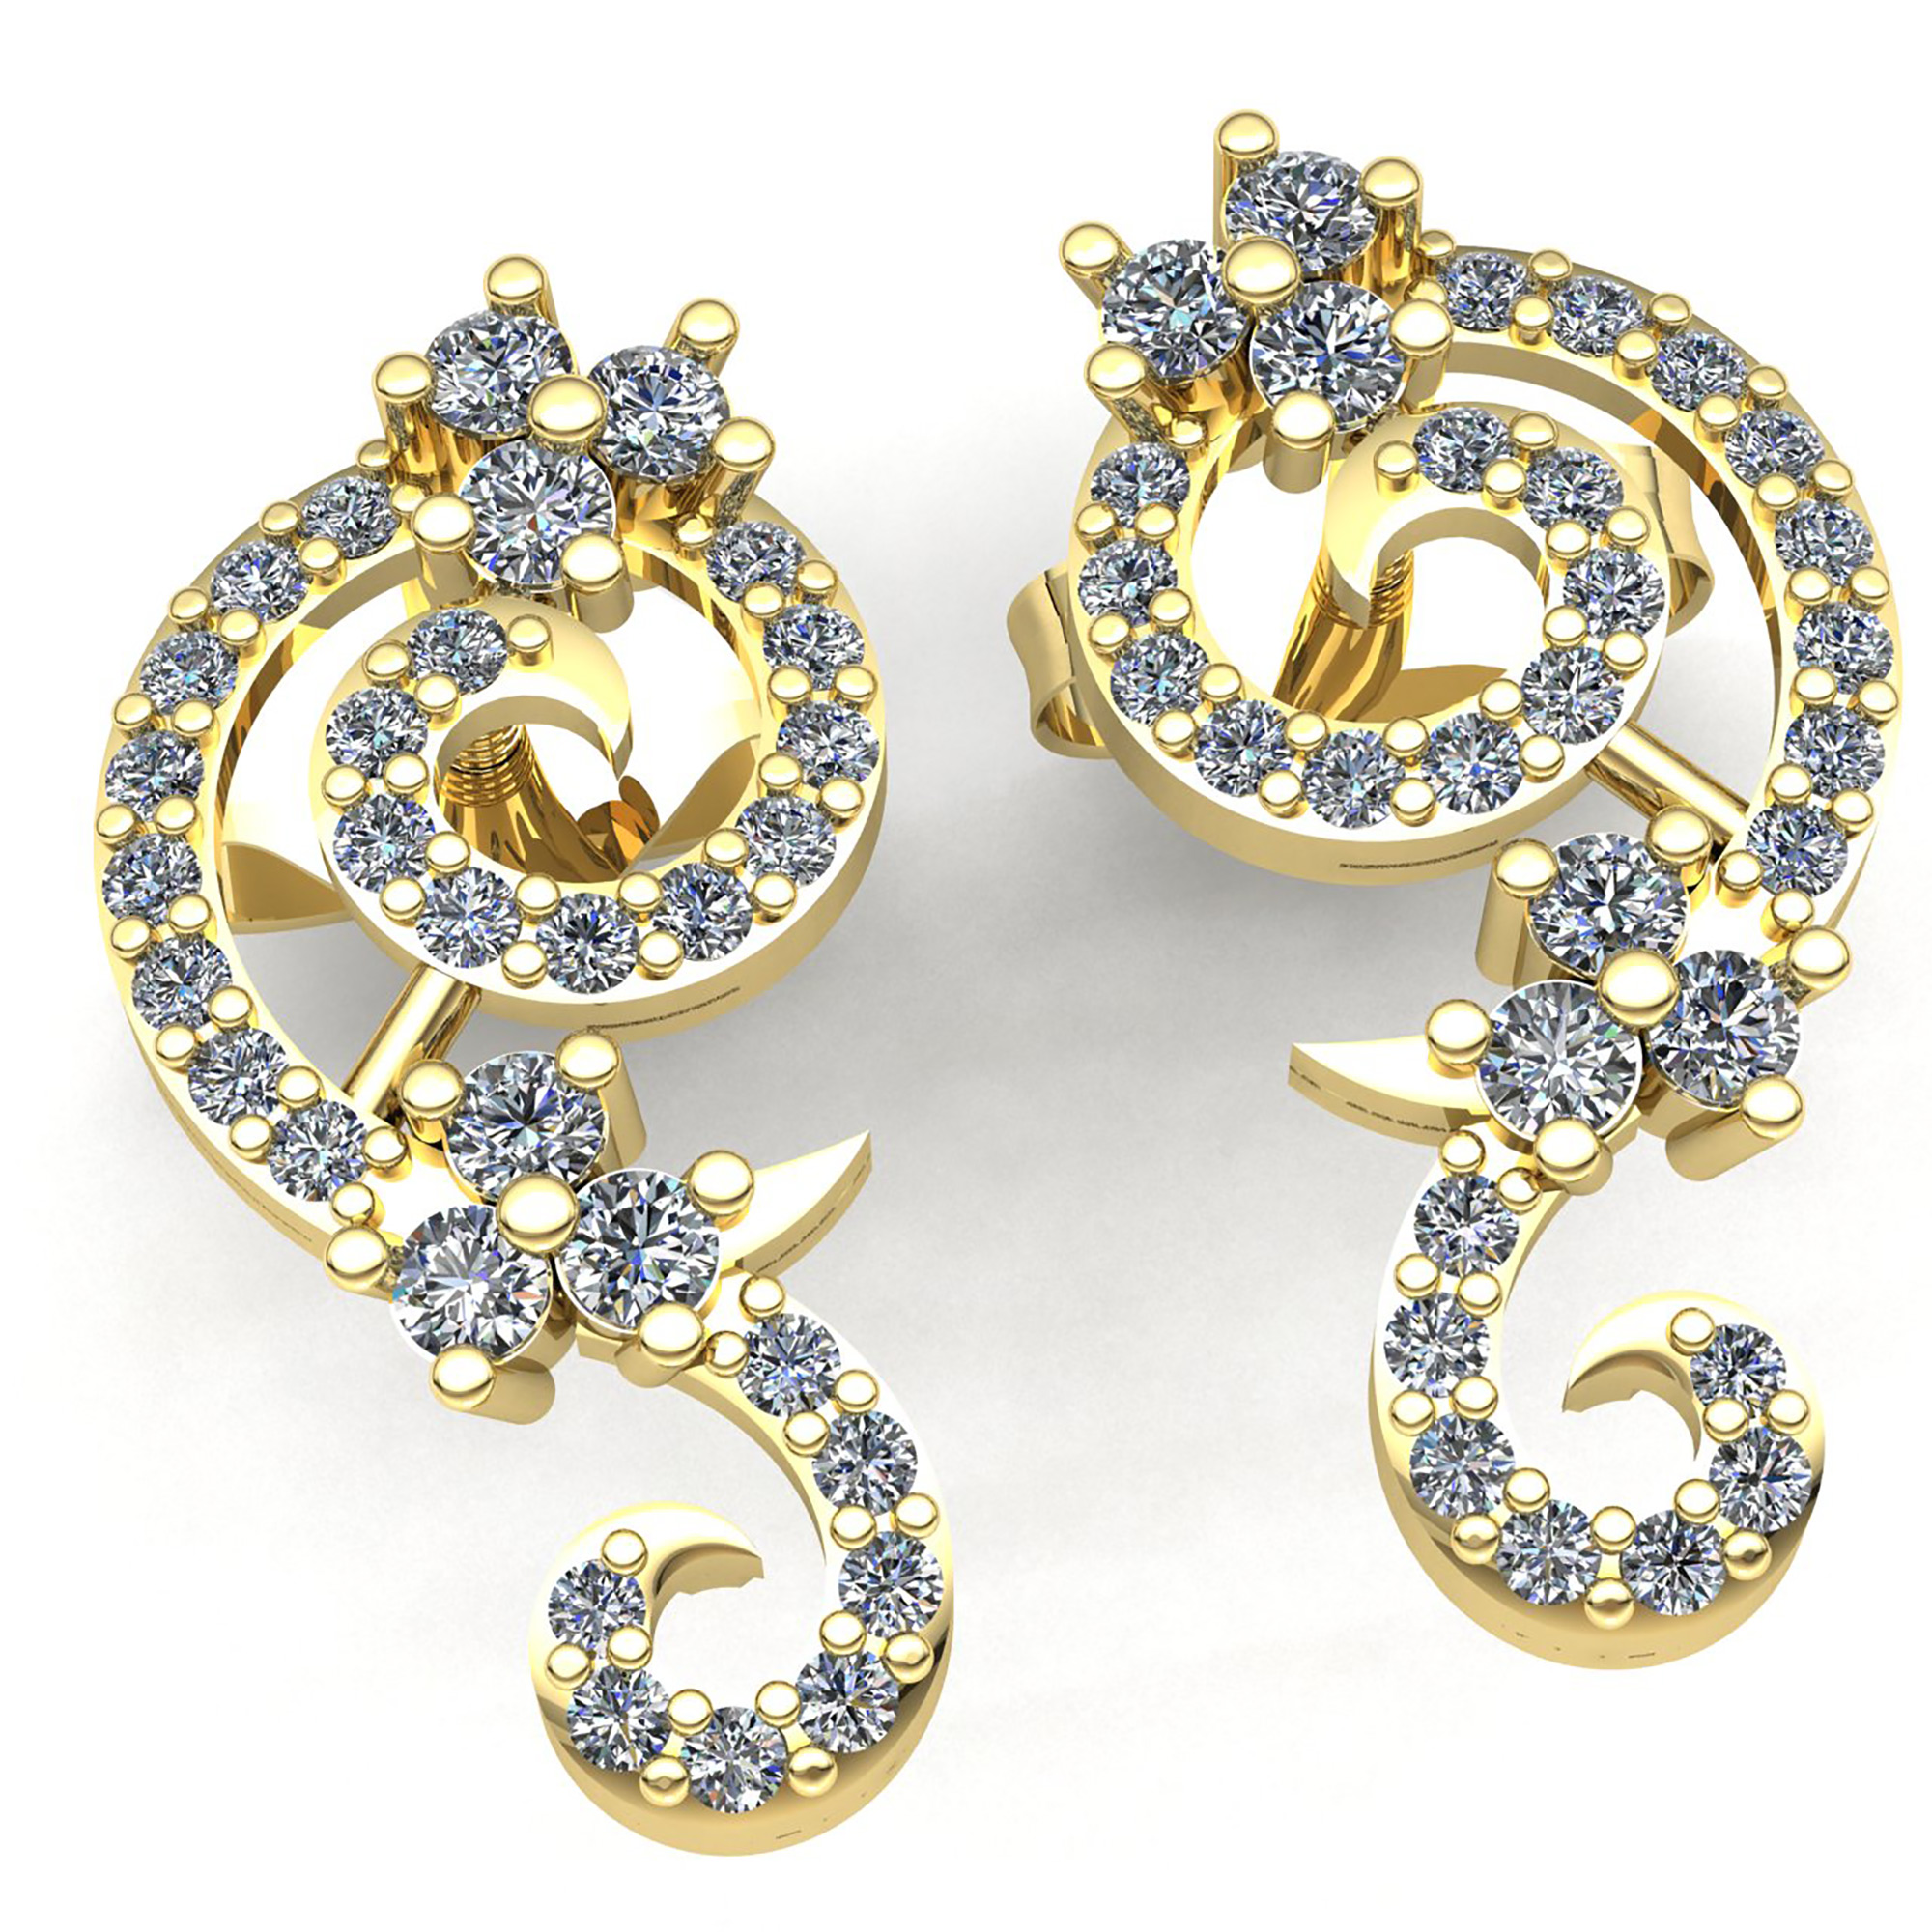 Jewel We Sell 1ctw Round Cut Diamond Ladies Twisted Unique Fashion Earrings Solid 14K White, Yellow, or Rose Gold GH SI1